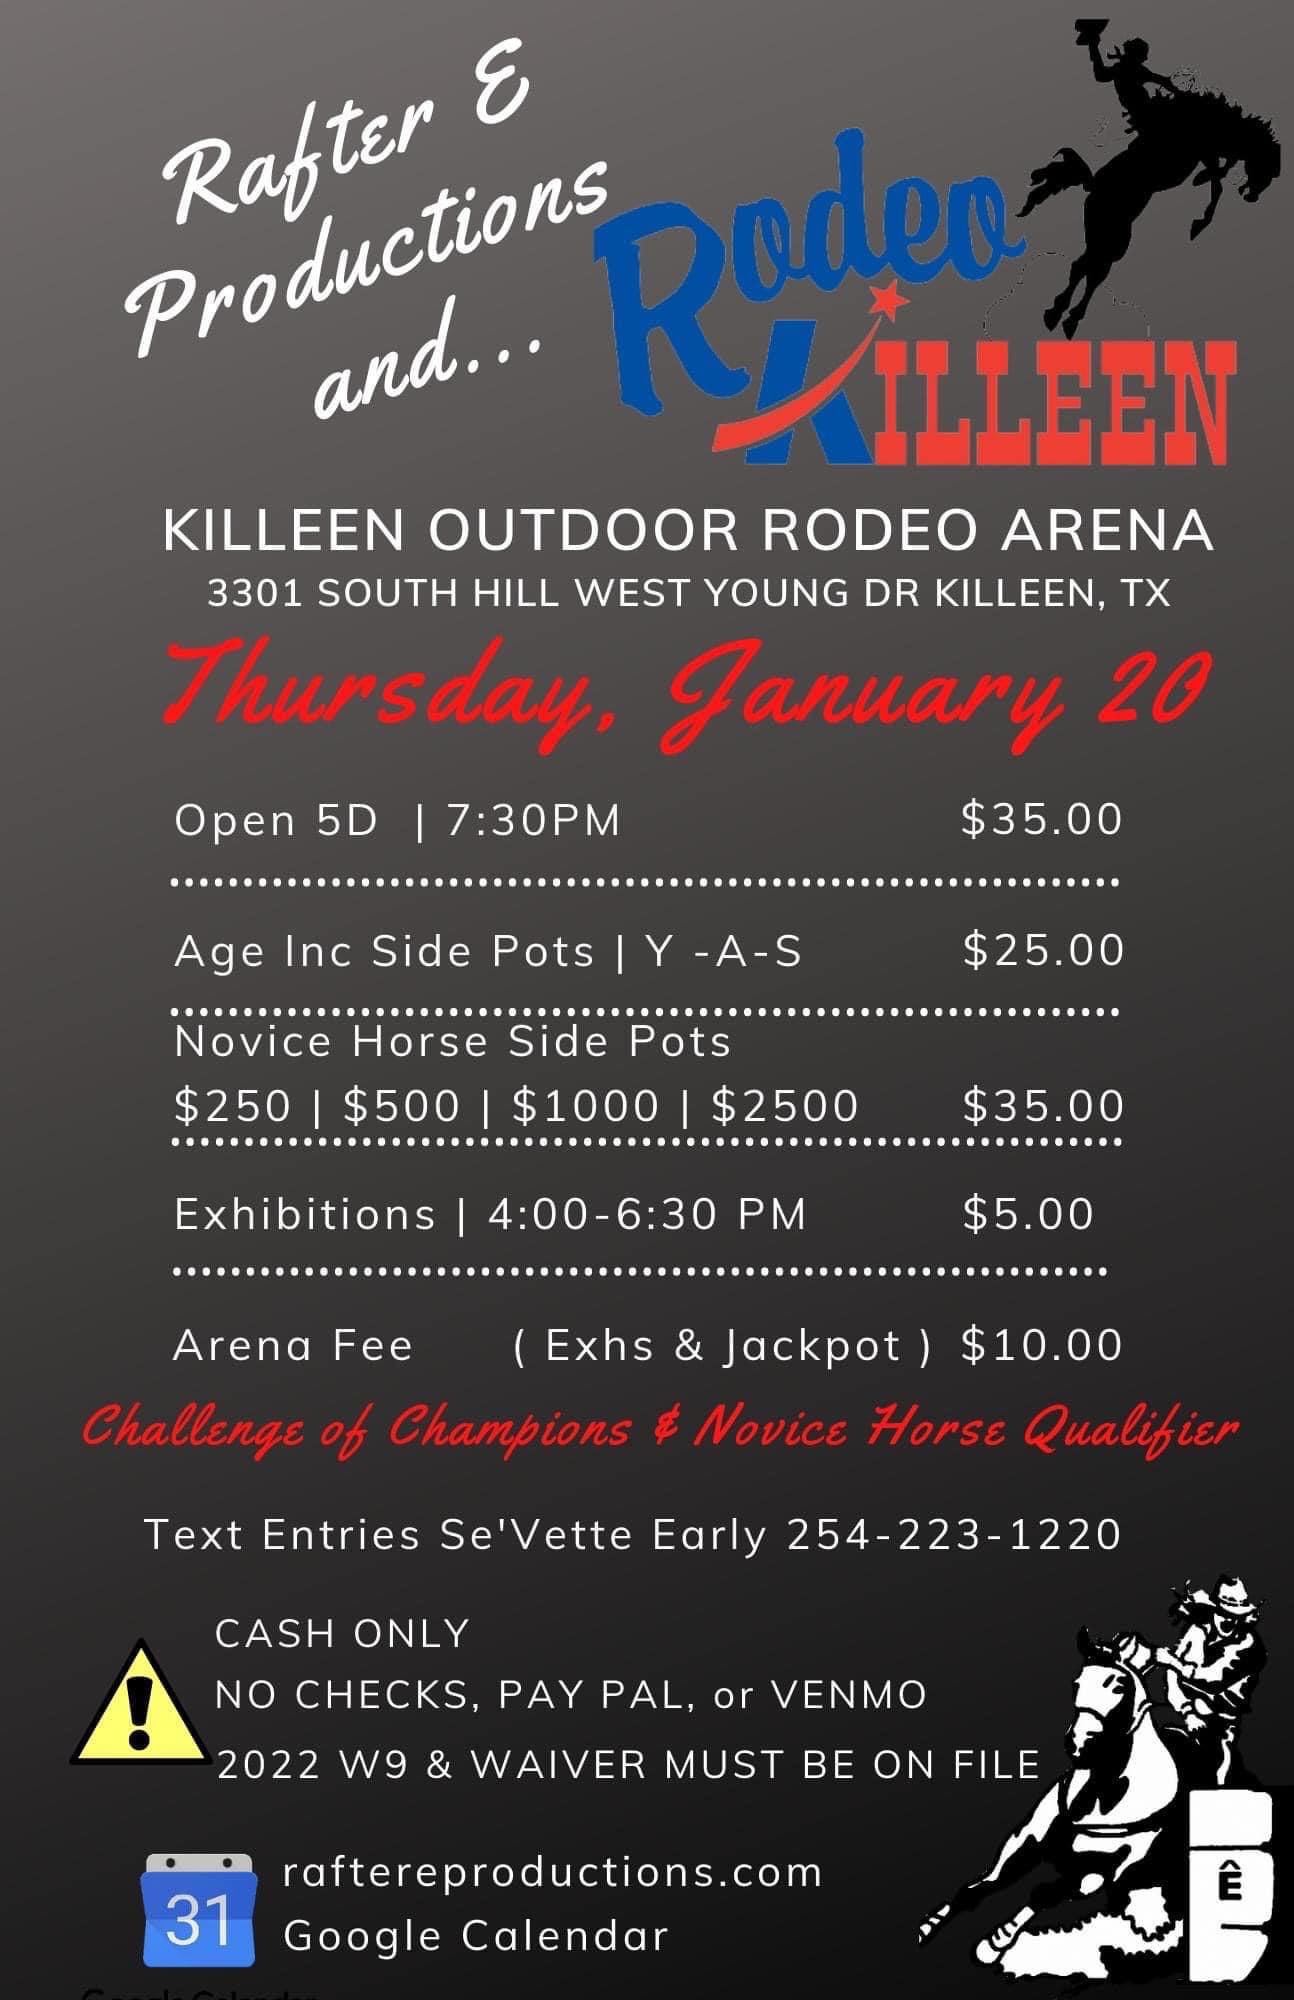 Rafter E Productions & Rodeo Killeen